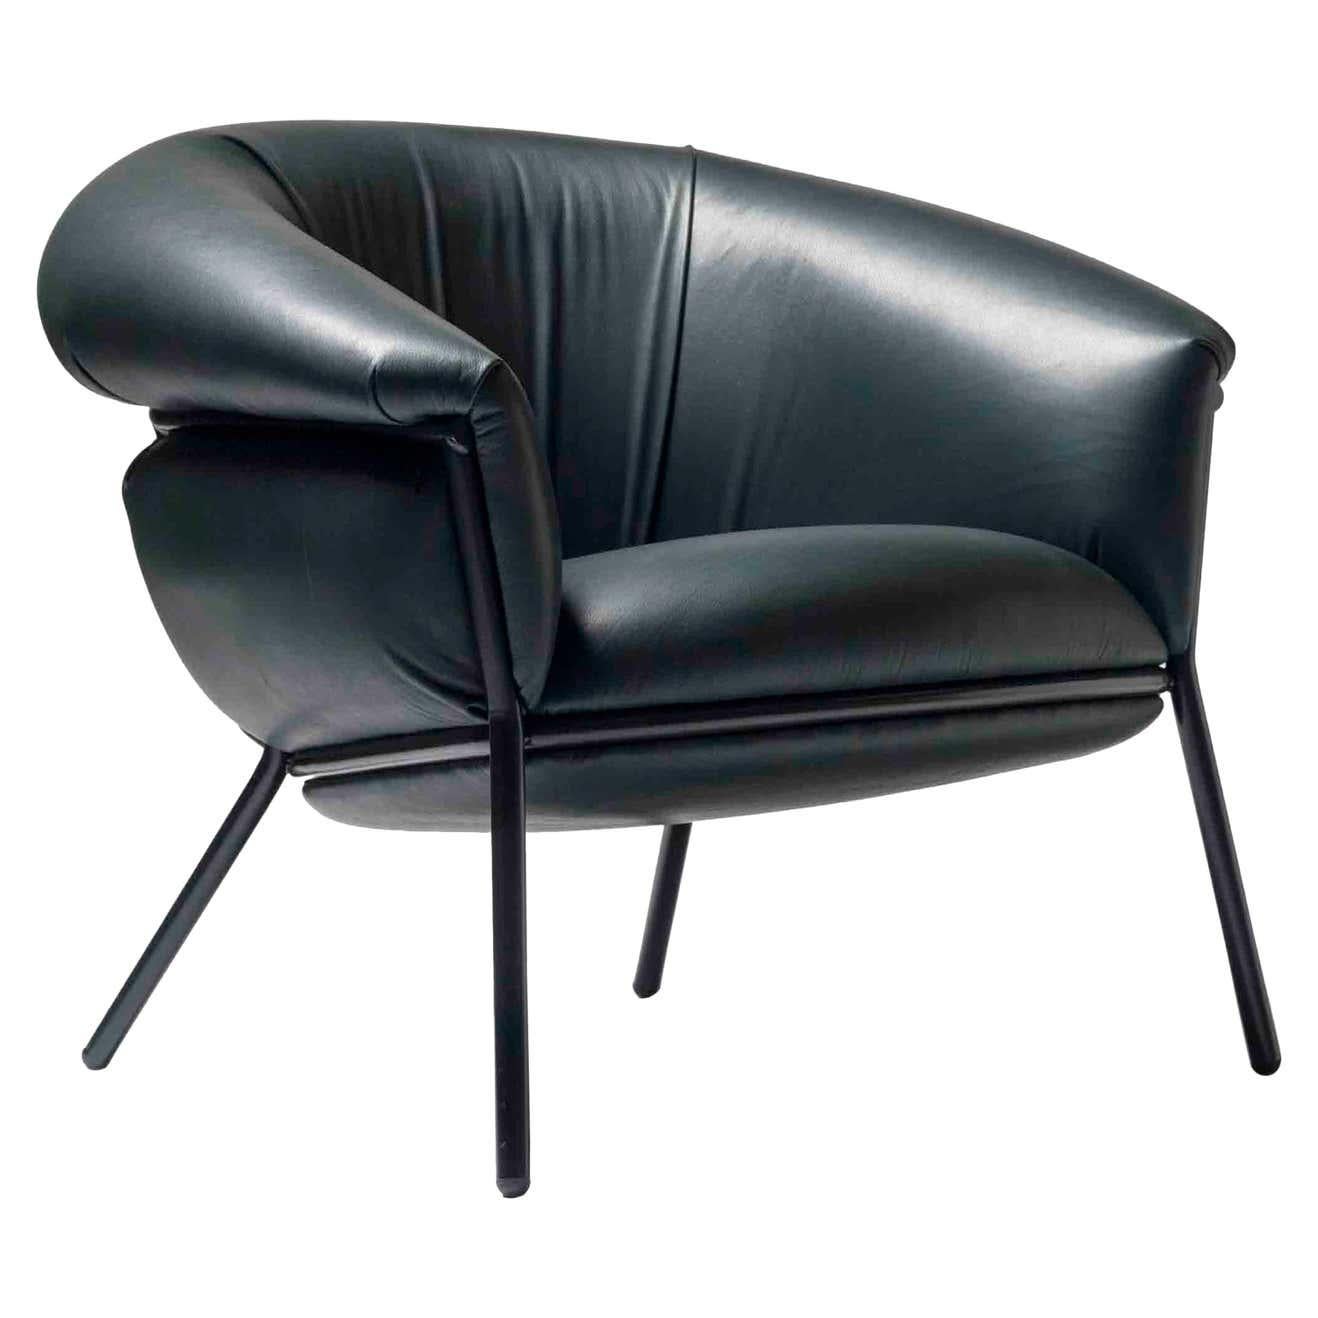 Lacquered Stephen Burks Contemporary Green Leather and Iron 'Grasso' Armchair for BD For Sale